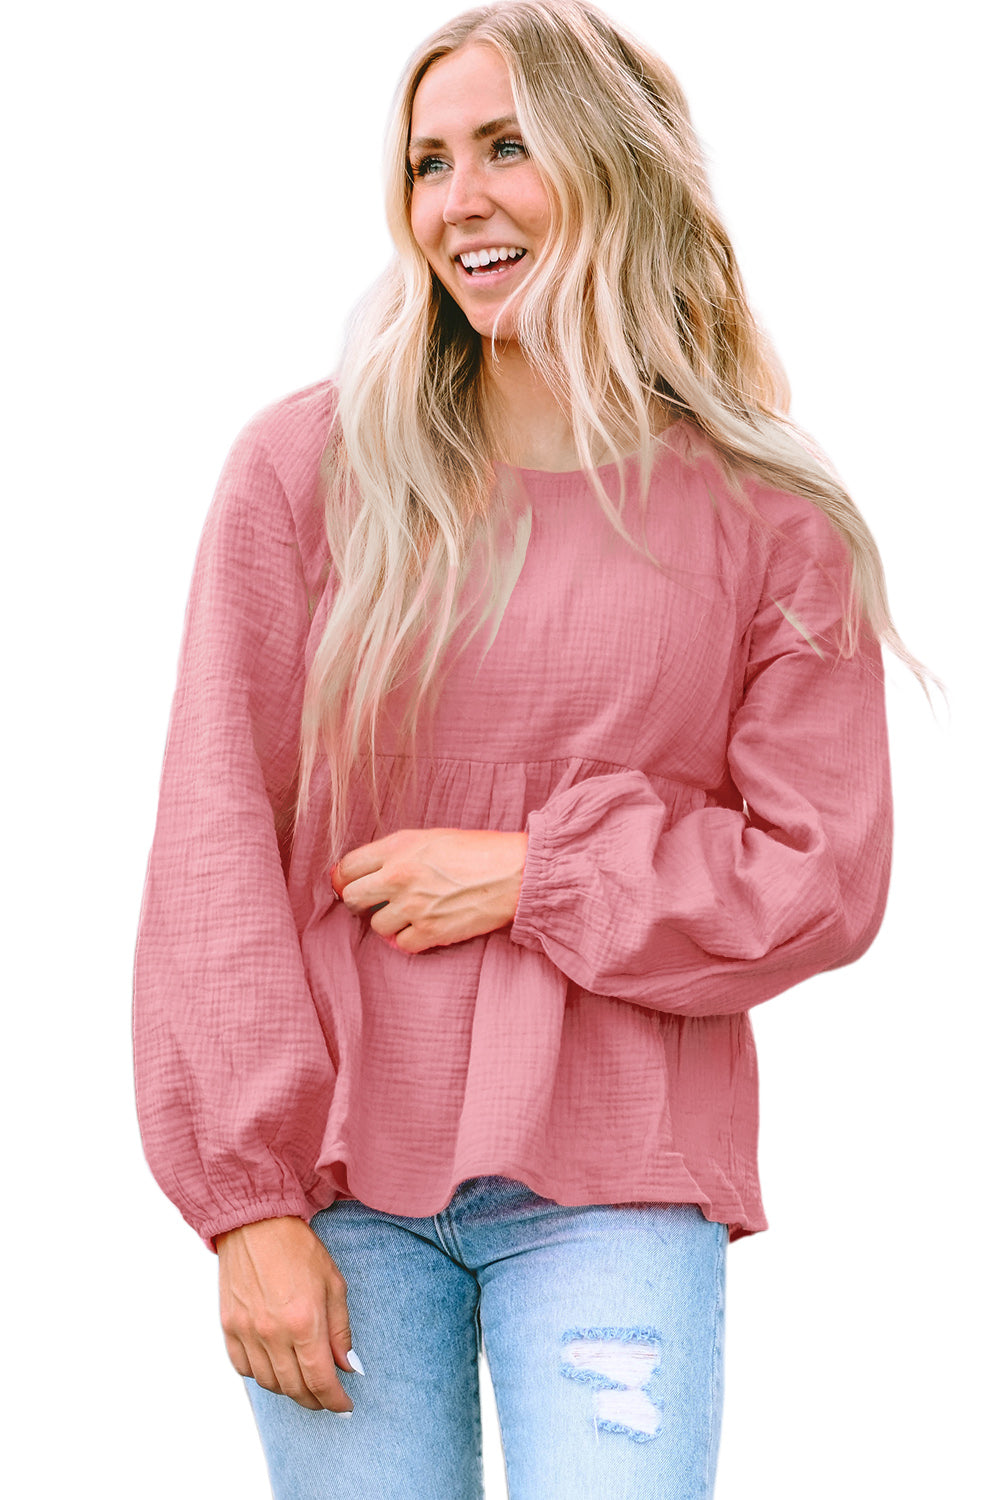 Pink Bubble Sleeve Textured Flowy Blouse